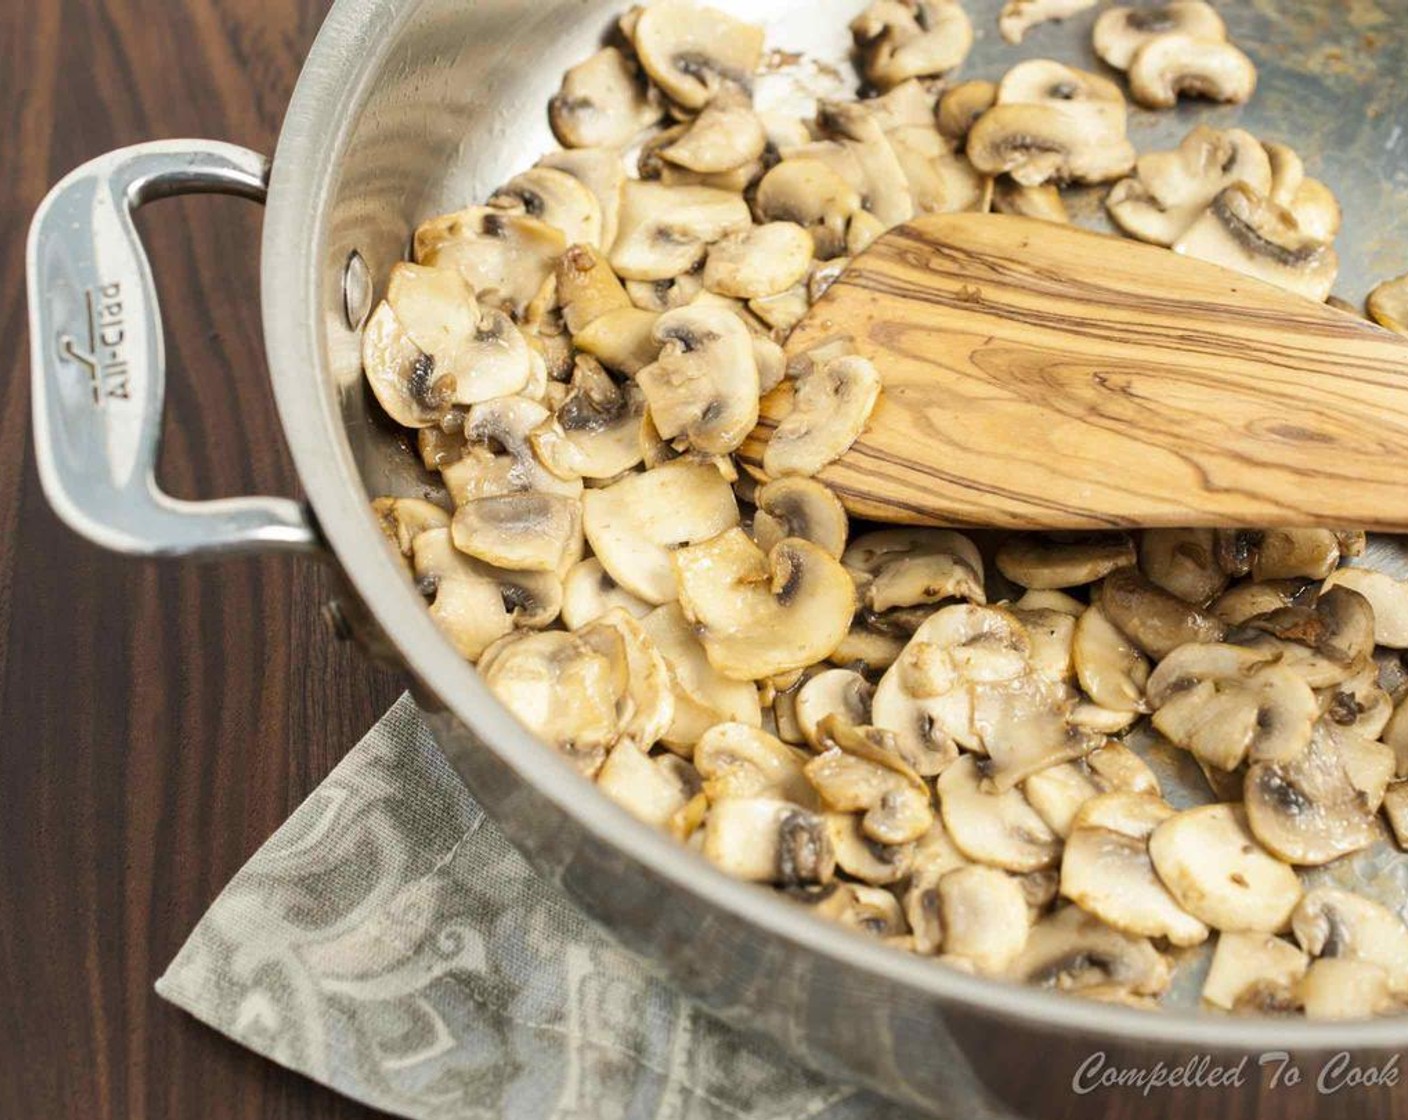 step 2 Using the same skillet, increase heat to medium-high and add 1 tablespoon of bacon fat. Add the sliced Mushrooms (2 1/4 cups) and cook until starting to brown and moisture has evaporated, about 8 minutes. Remove from pan and set aside.